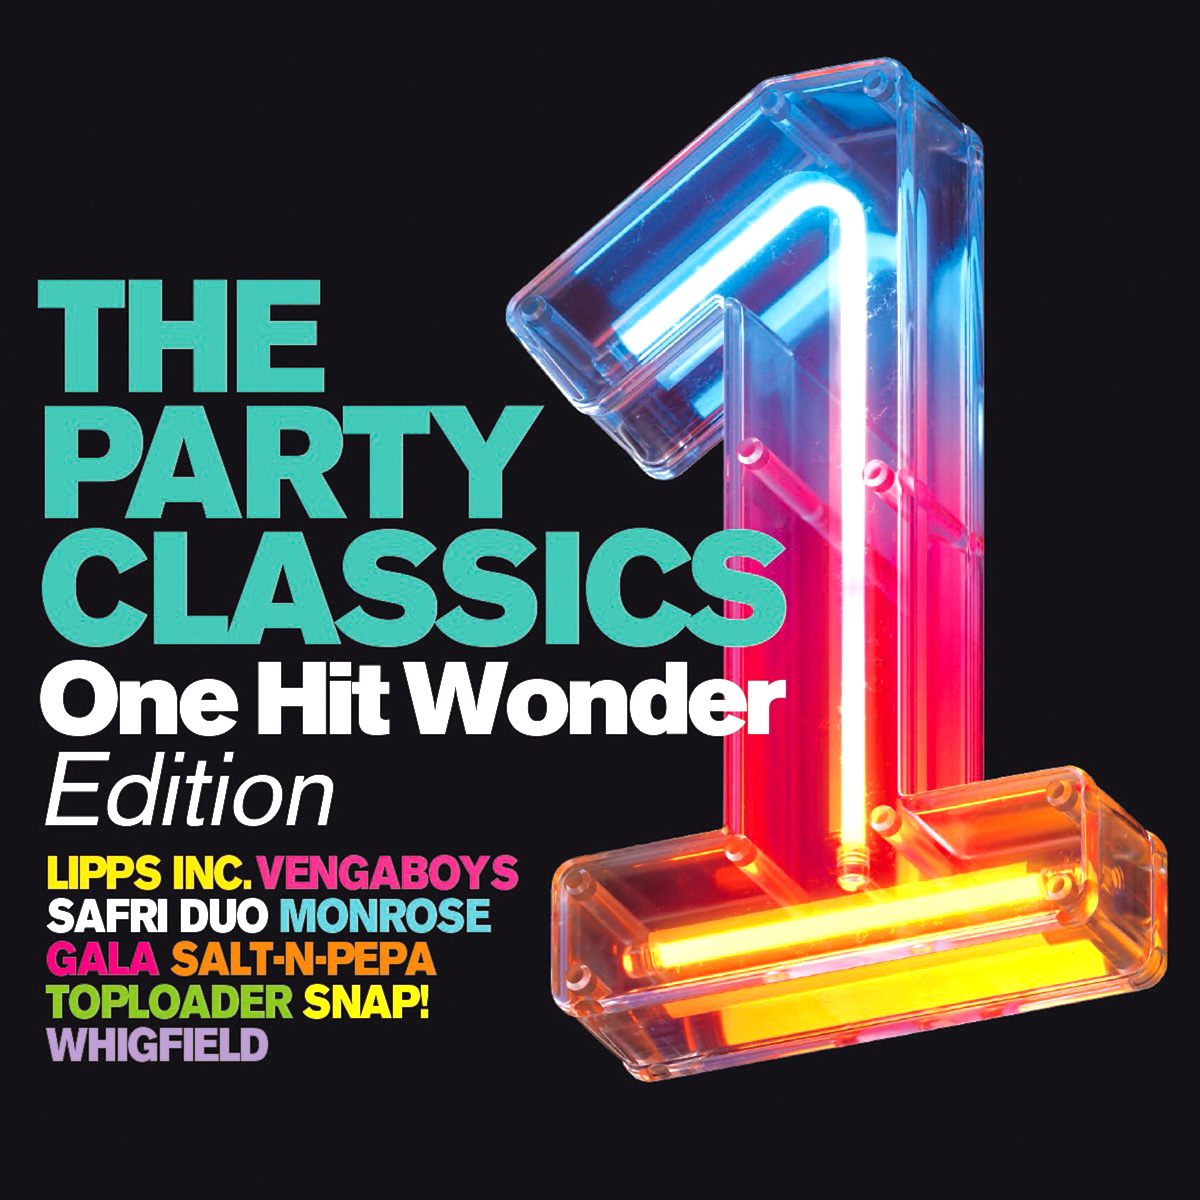 The Party Classics - One Hit Wonder Edition